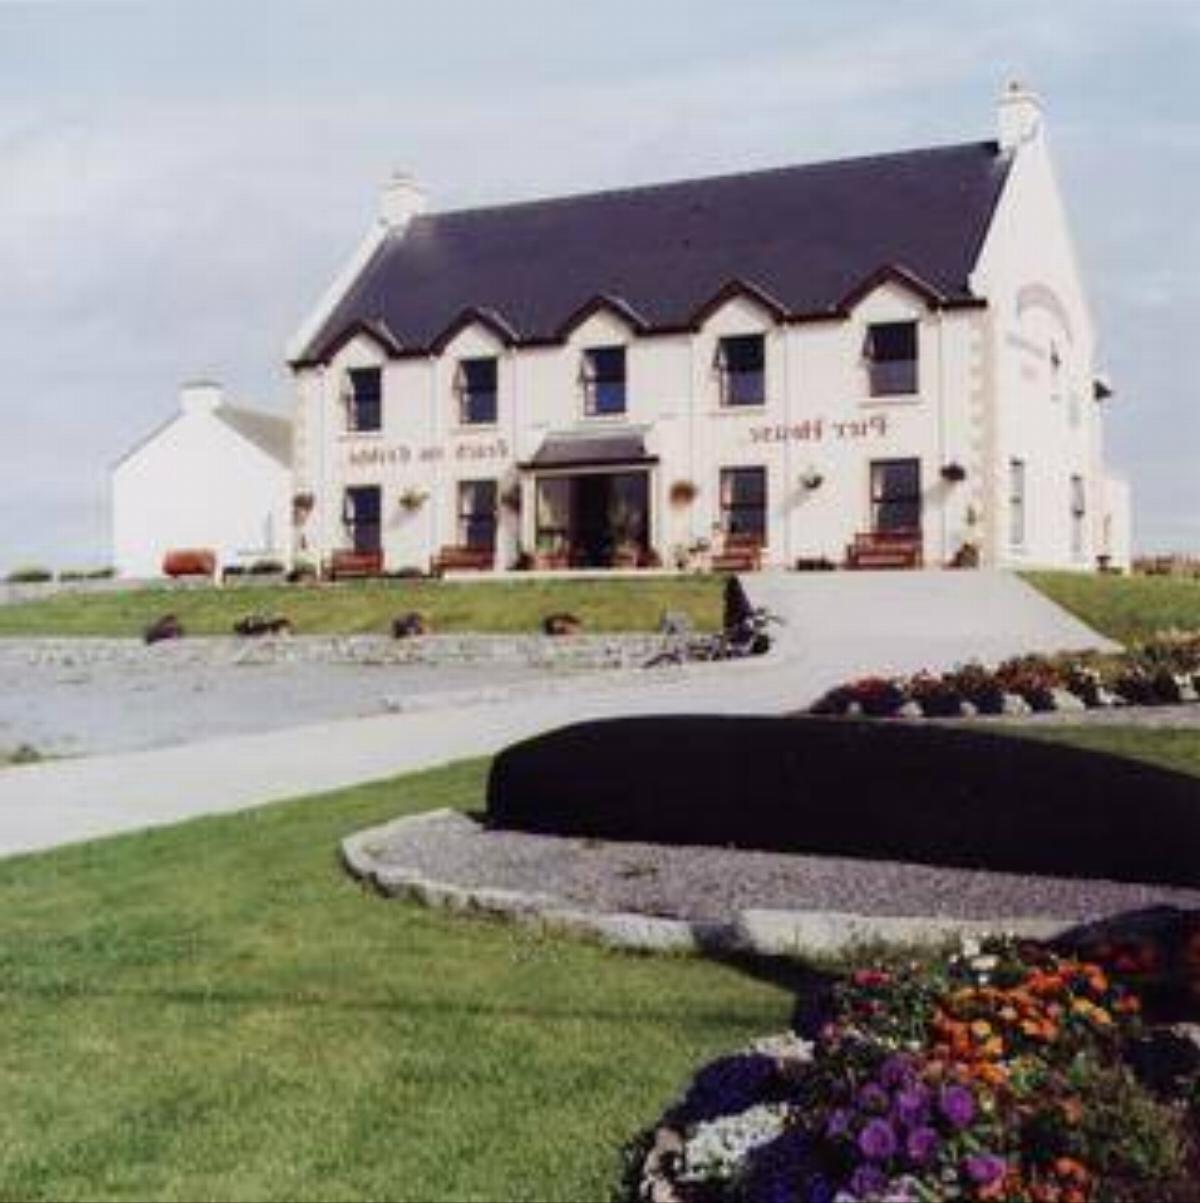 Pier House Guesthouse Hotel Inis Mor Ireland